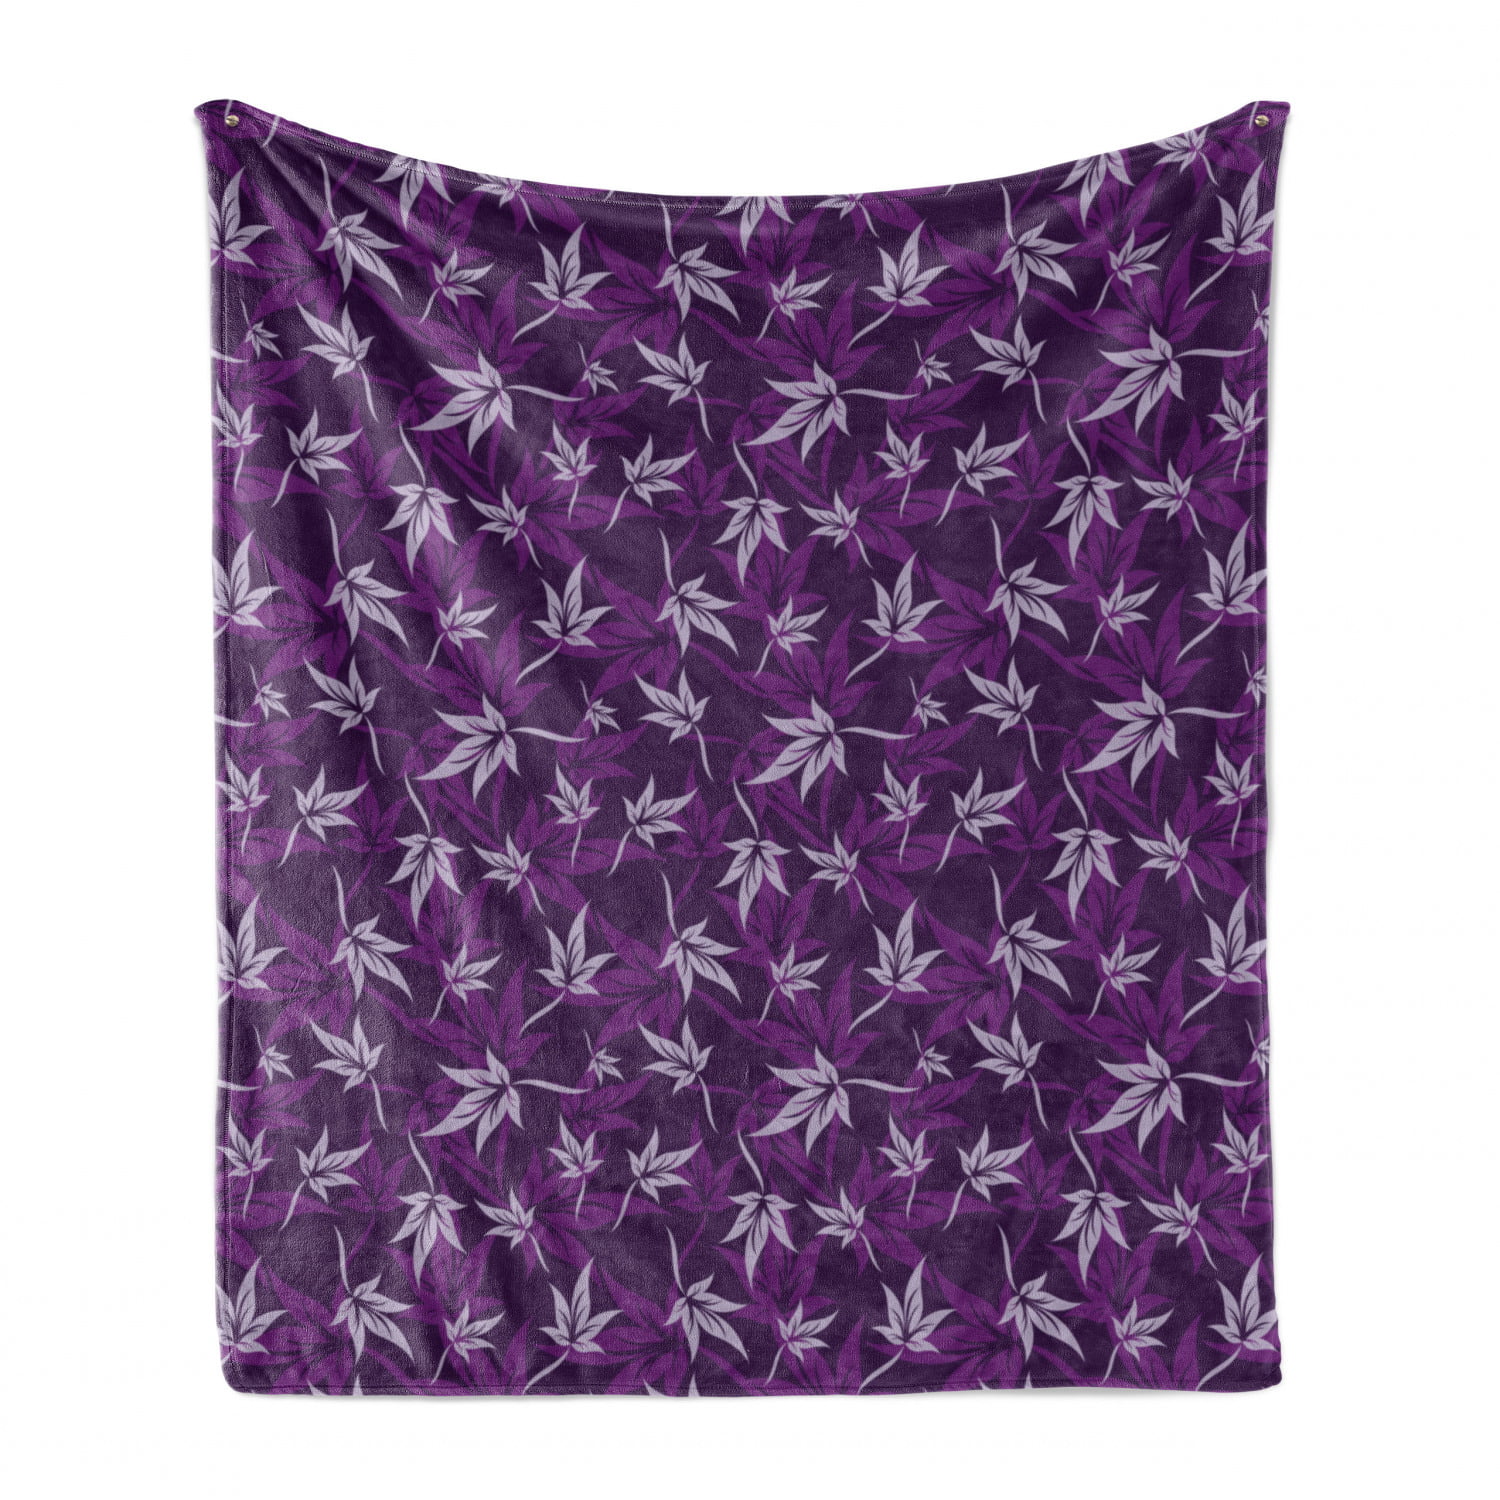 50 x 60 Cozy Plush for Indoor and Outdoor Use Ambesonne Indigo Soft Flannel Fleece Throw Blanket Purple Lilac Abstract Lily Flowers Pattern Country Garden Spring Summer Season Themed Image 